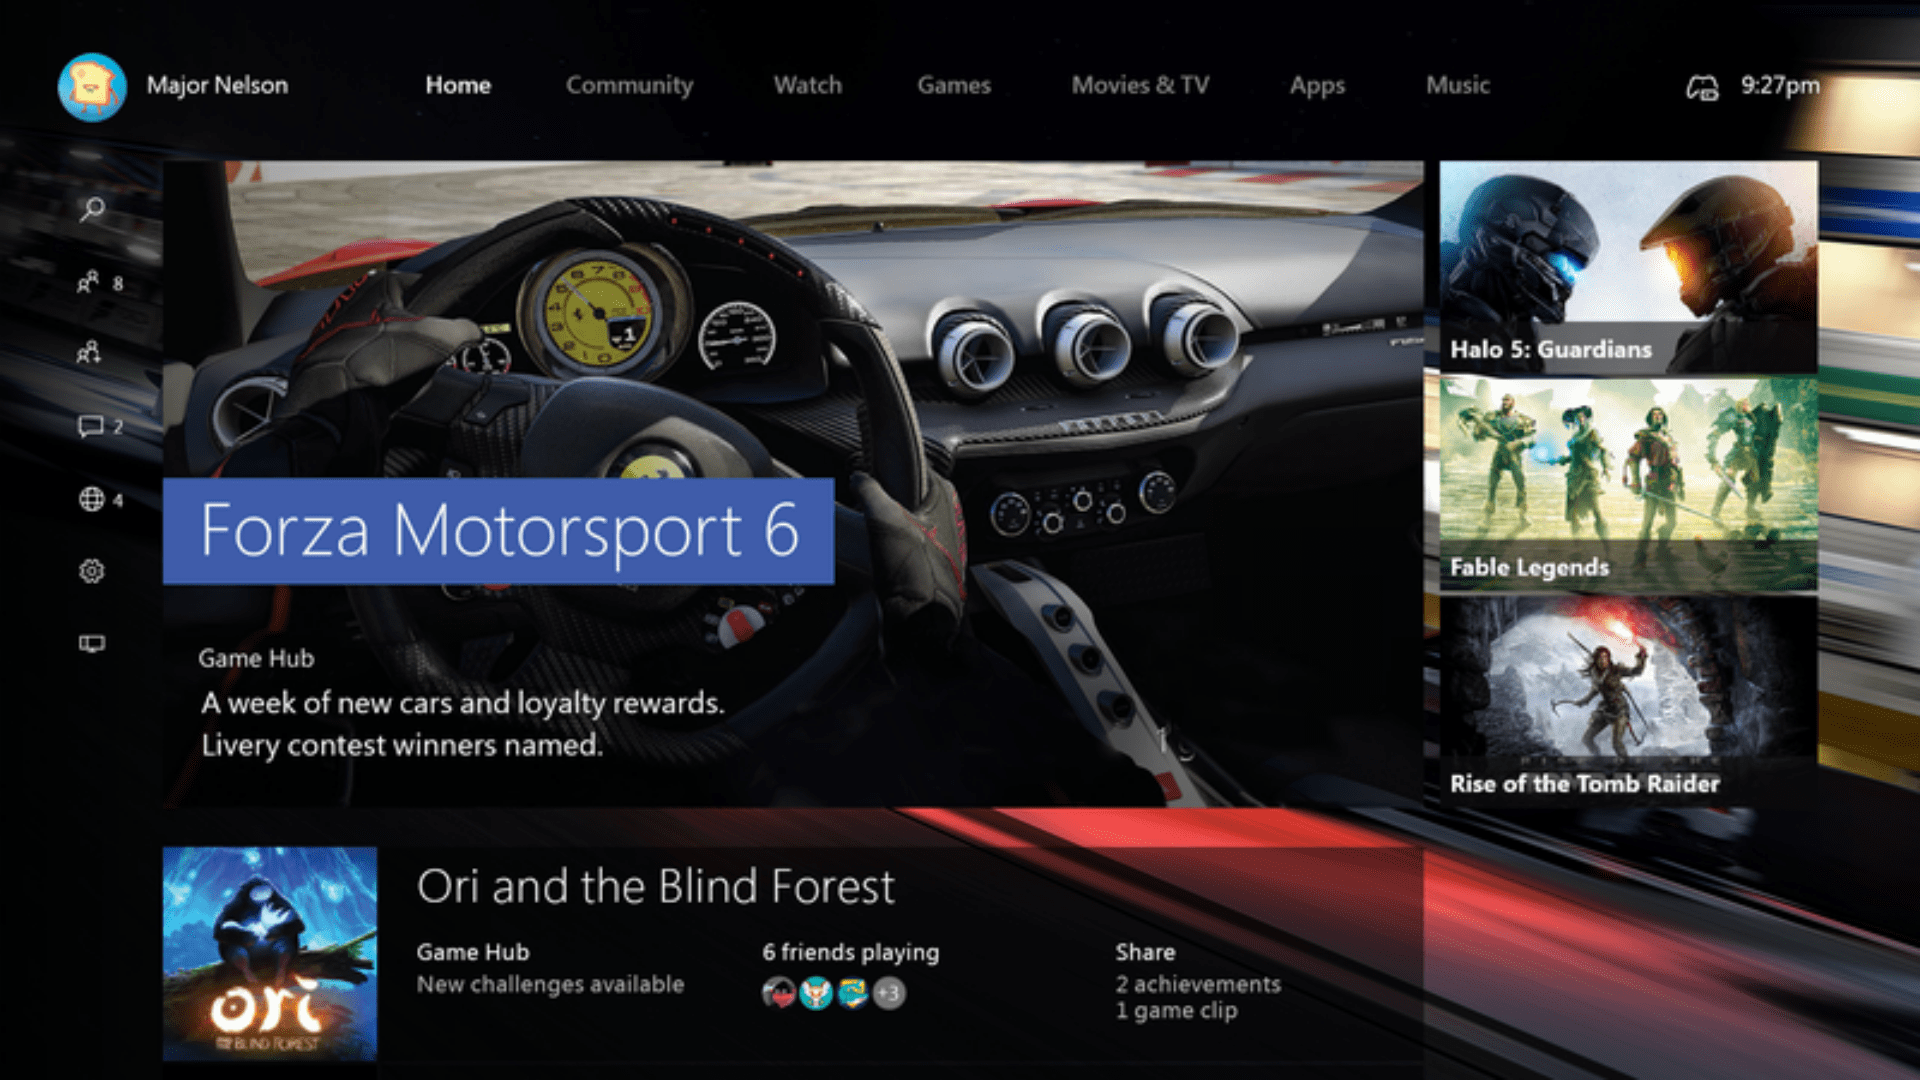 New Dashboard, Cortana Coming to Xbox One Preview Program Members in September